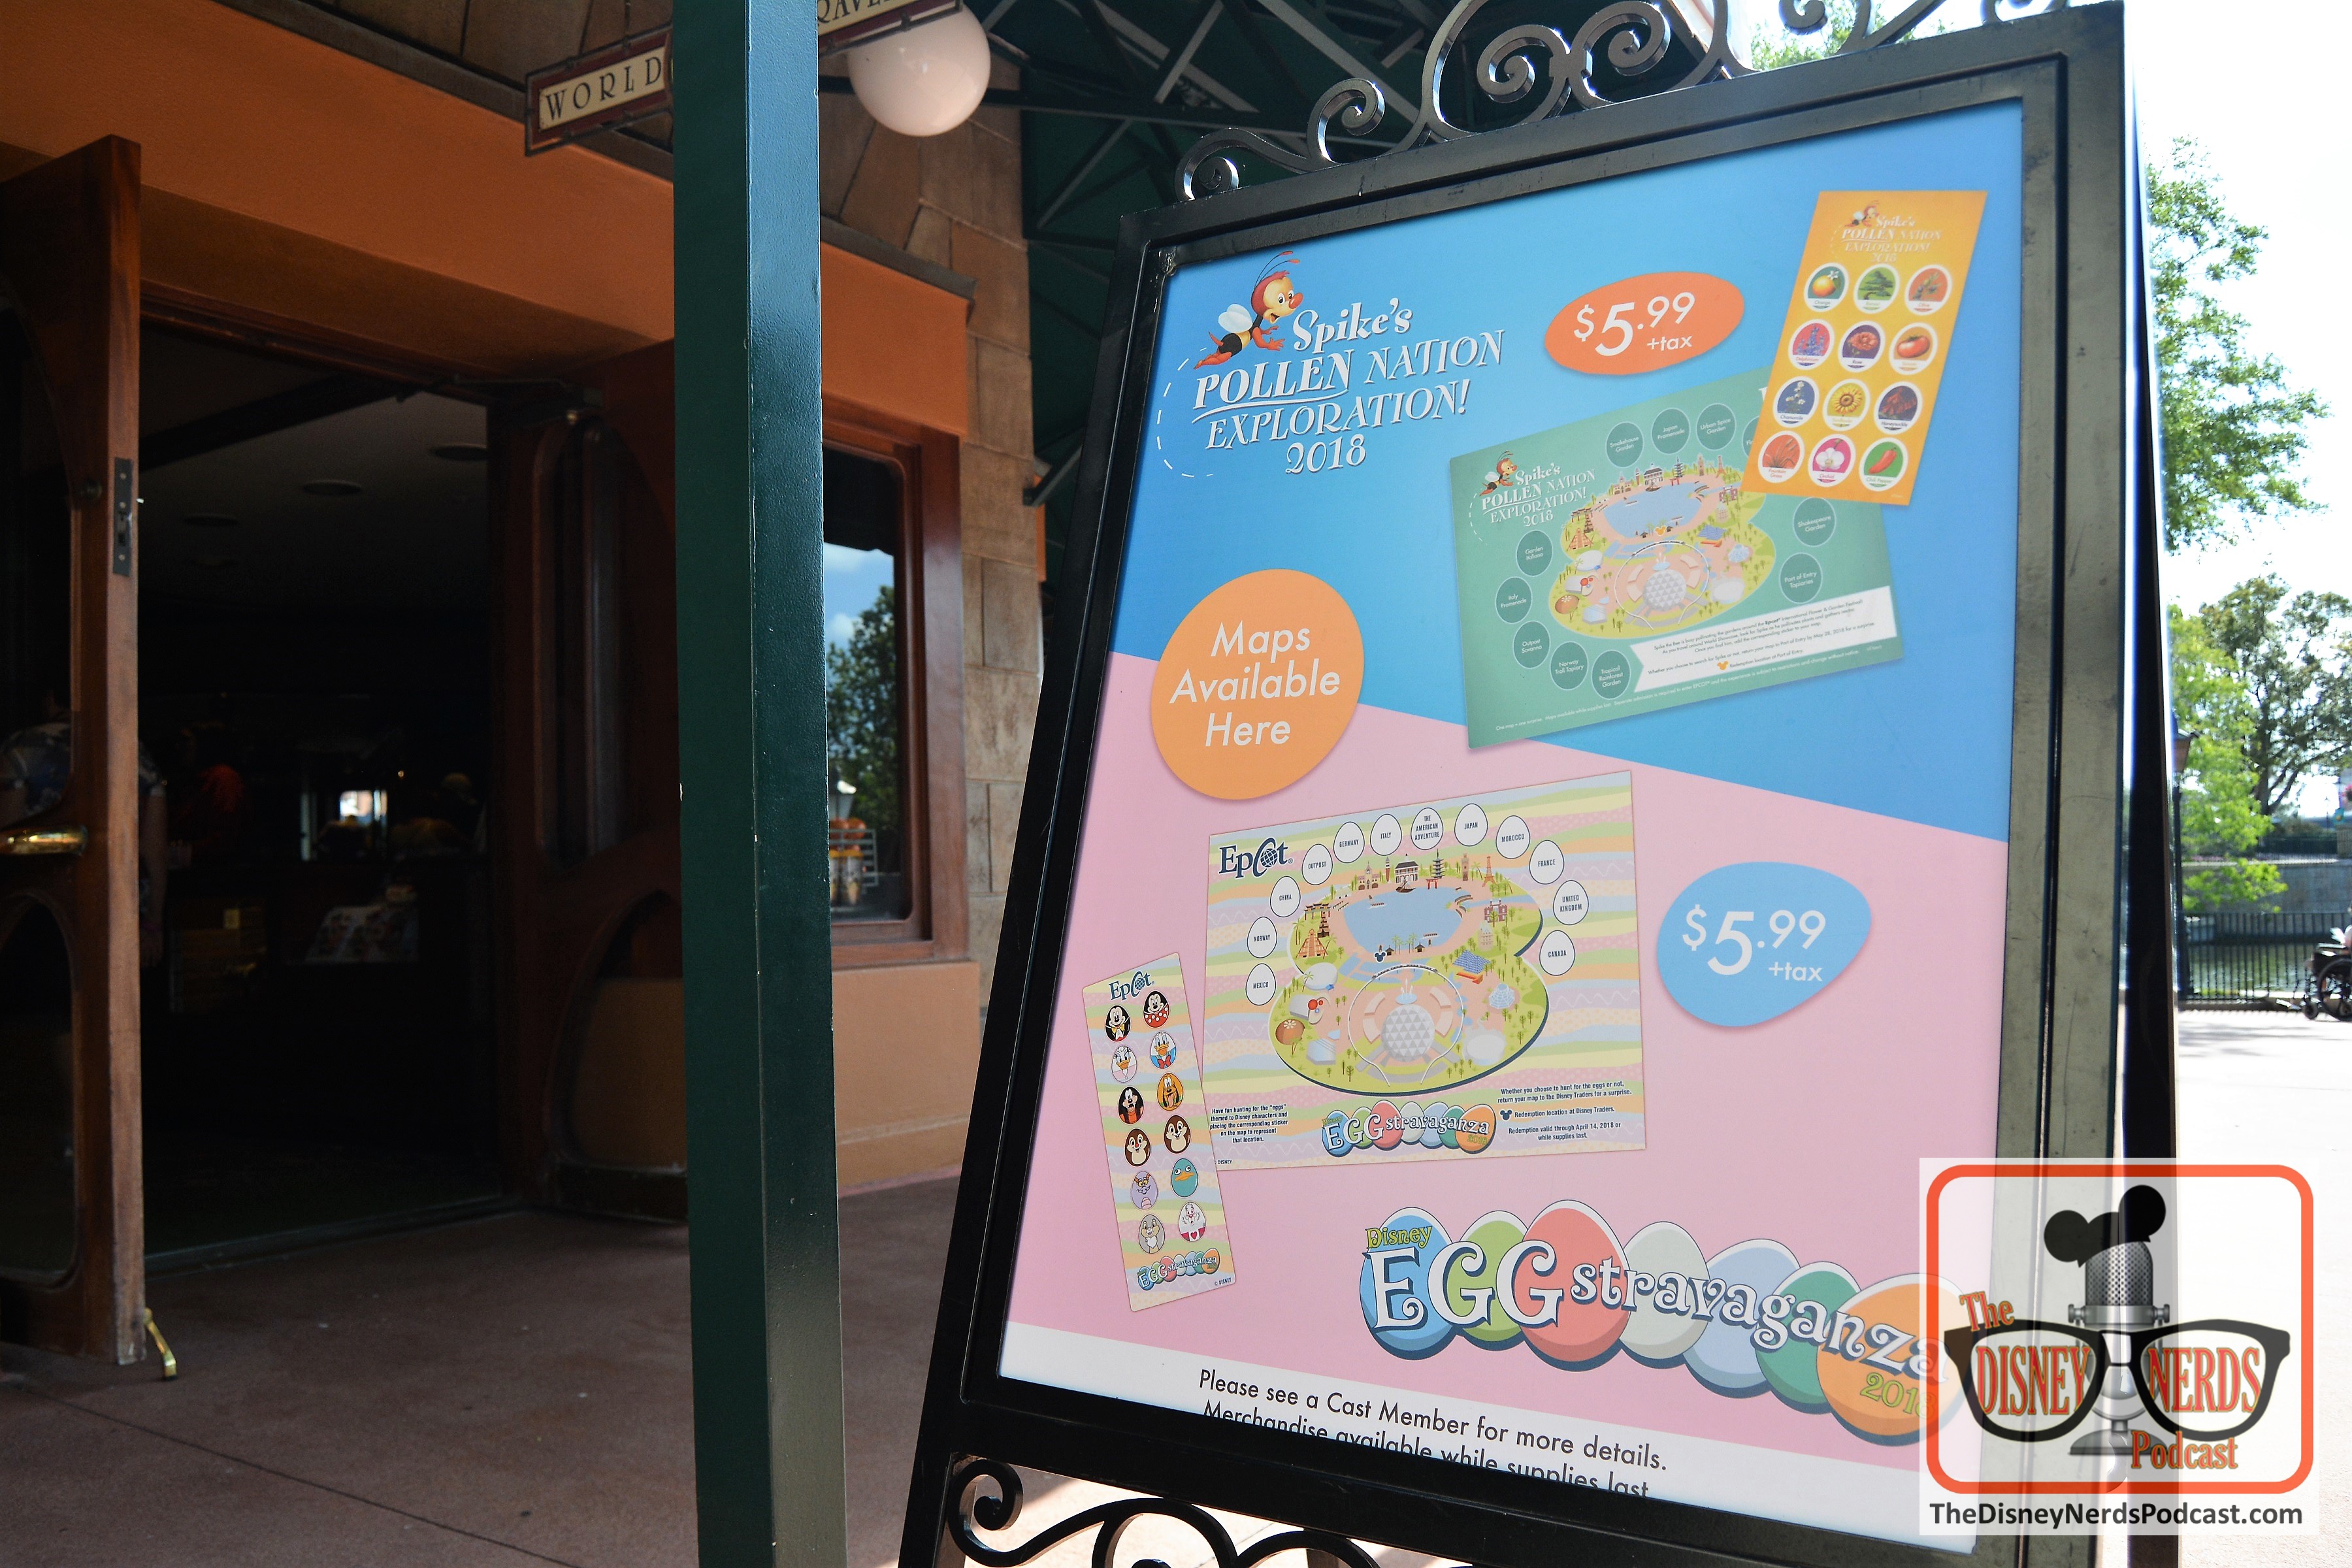 The 2018 Epcot Flower and Garden Festival Featuring the EGGstravaganza (Easter Egg) Scavenger Hunt - Spike's Pollen Nation Exploration is also available in 2018